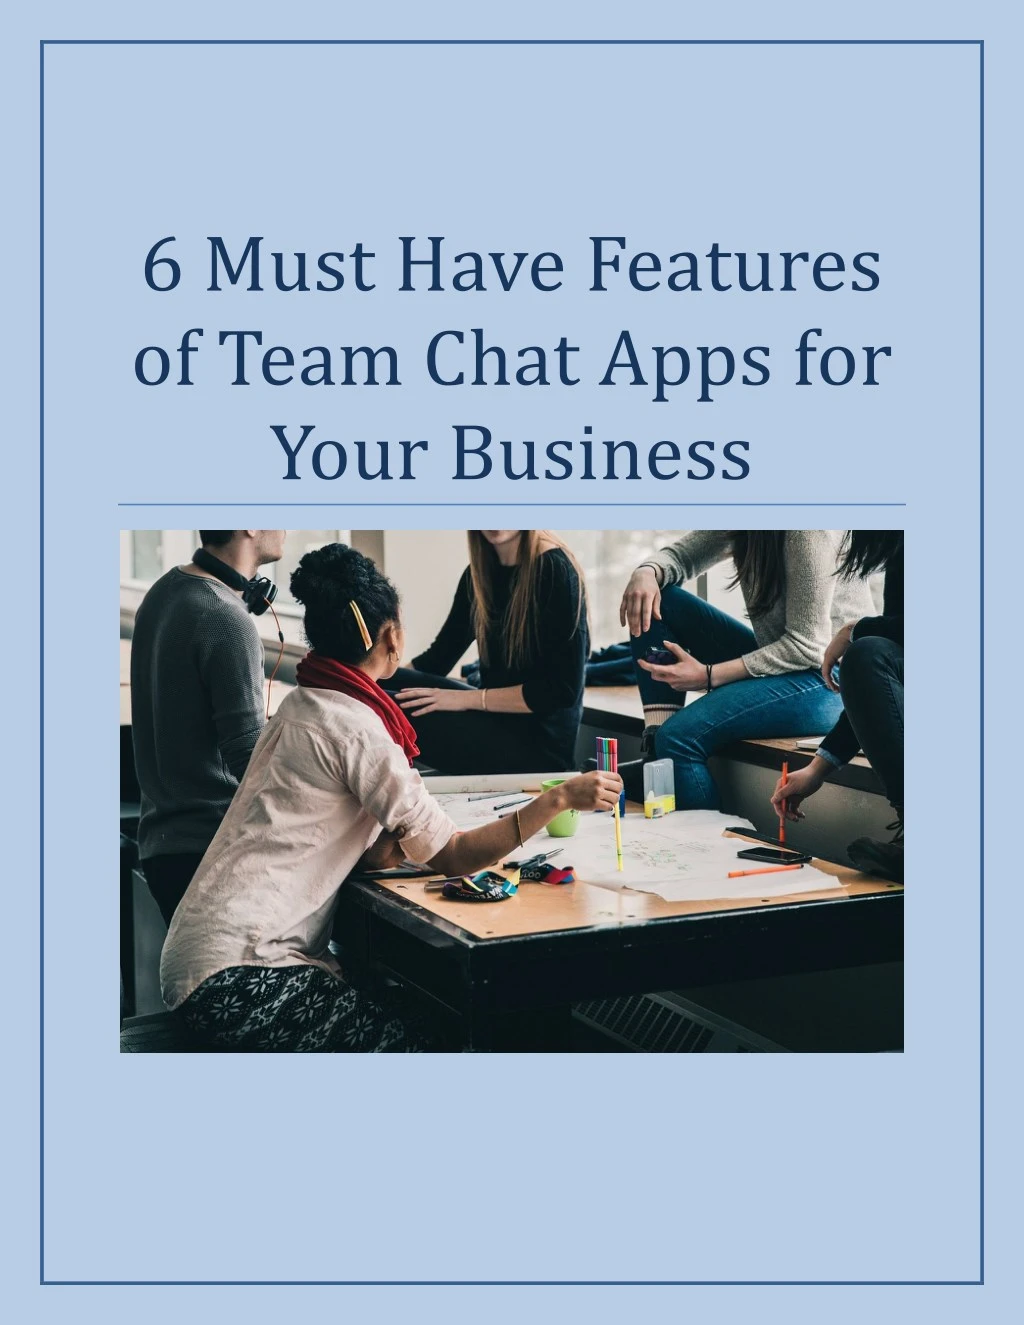 6 must have features of team chat apps for your